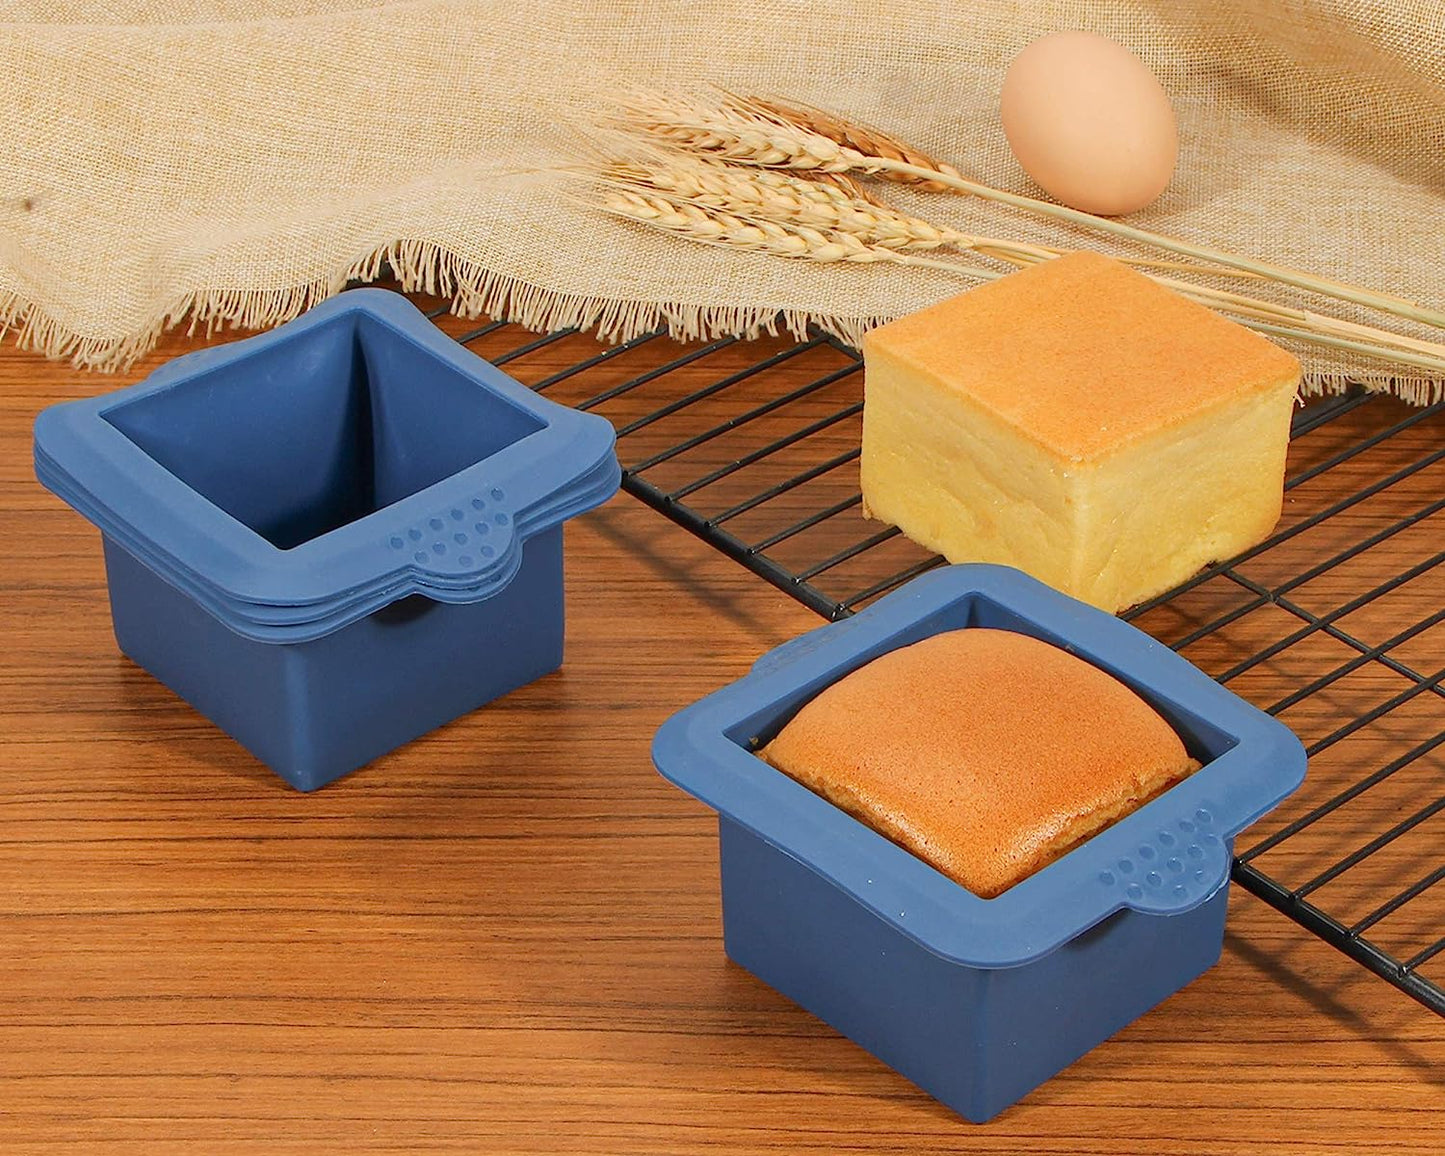 Square Silicone Cake Mold Baking  Square Silicone Baking Mold Pan